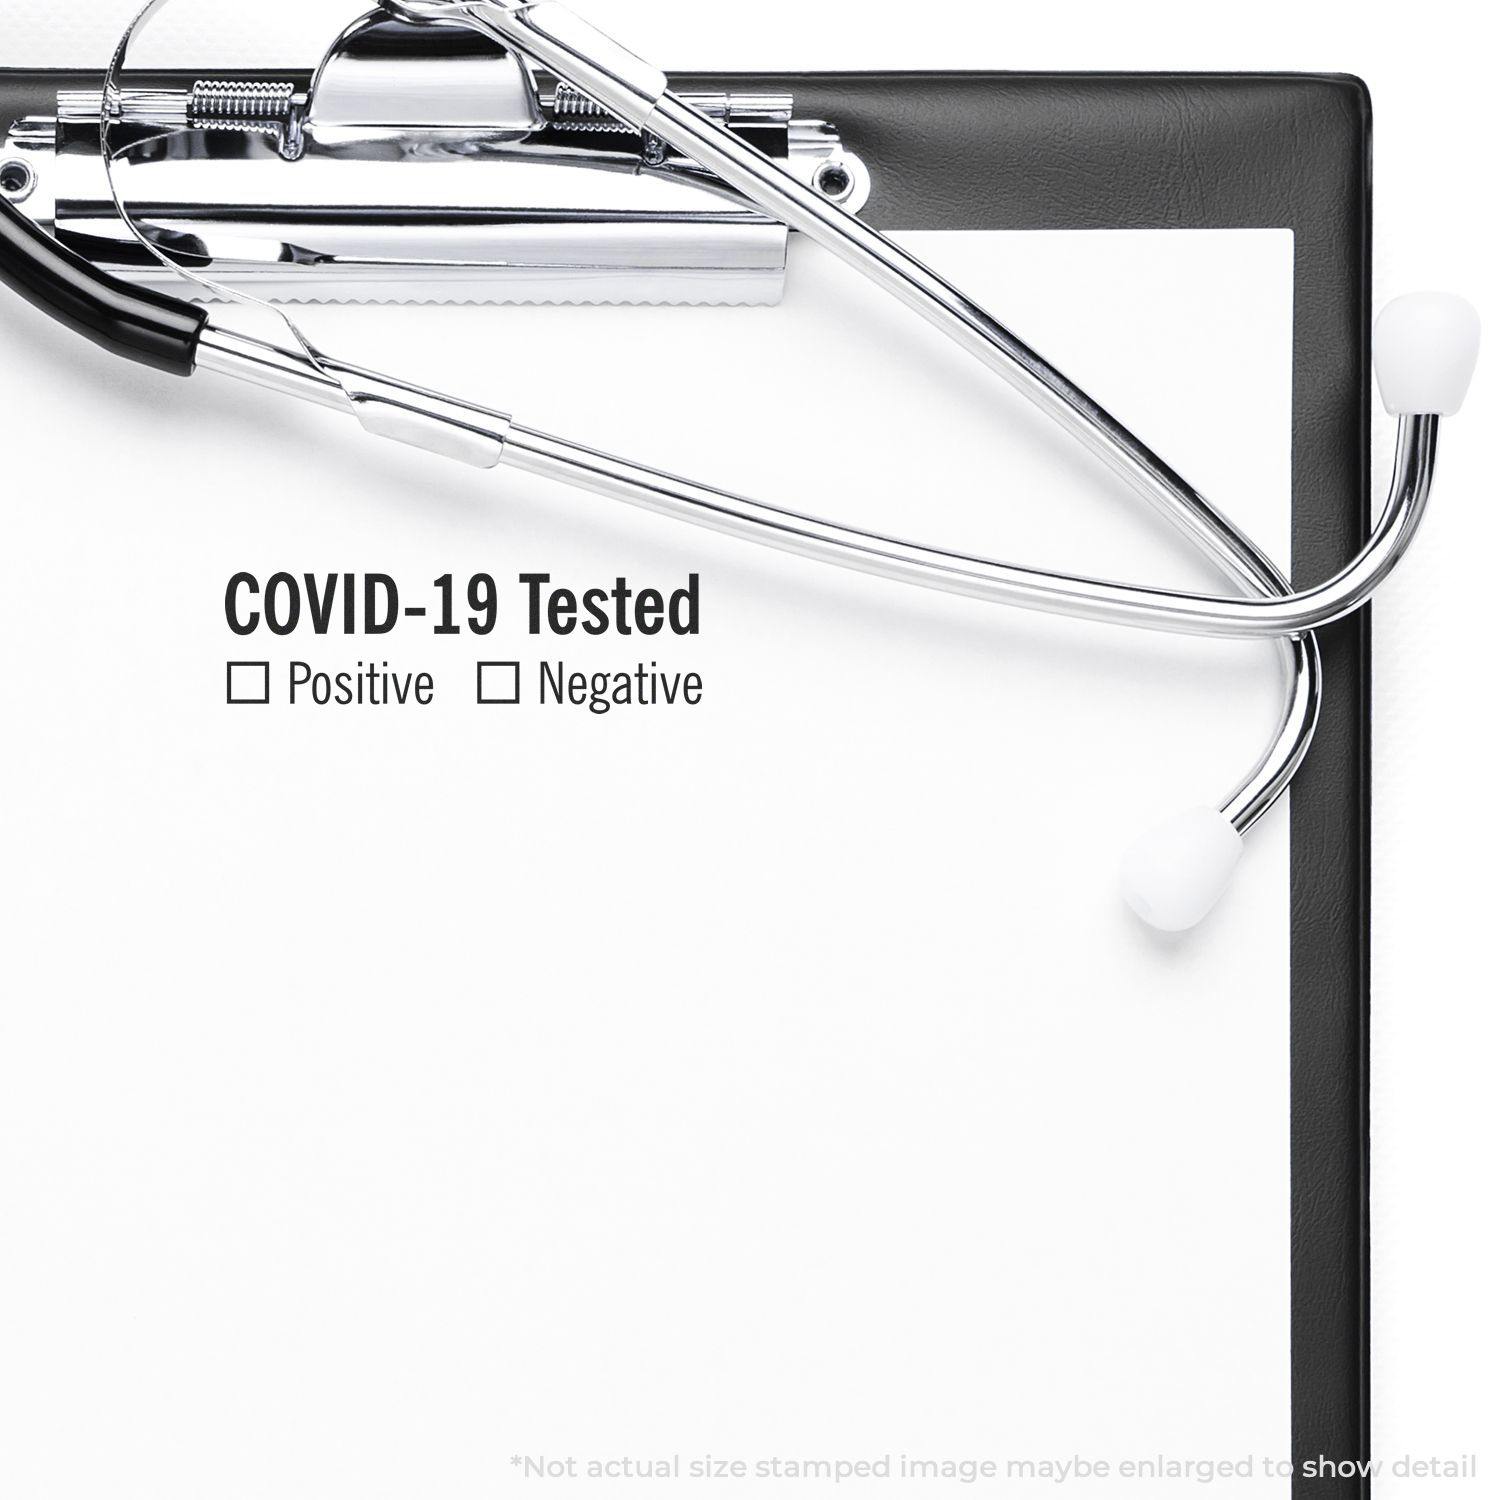 A stock office pre-inked stamp with a stamped image showing how the text "COVID-19 Tested" with a space underneath to check a box based on whether a person is positive or negative for the virus is displayed after stamping.